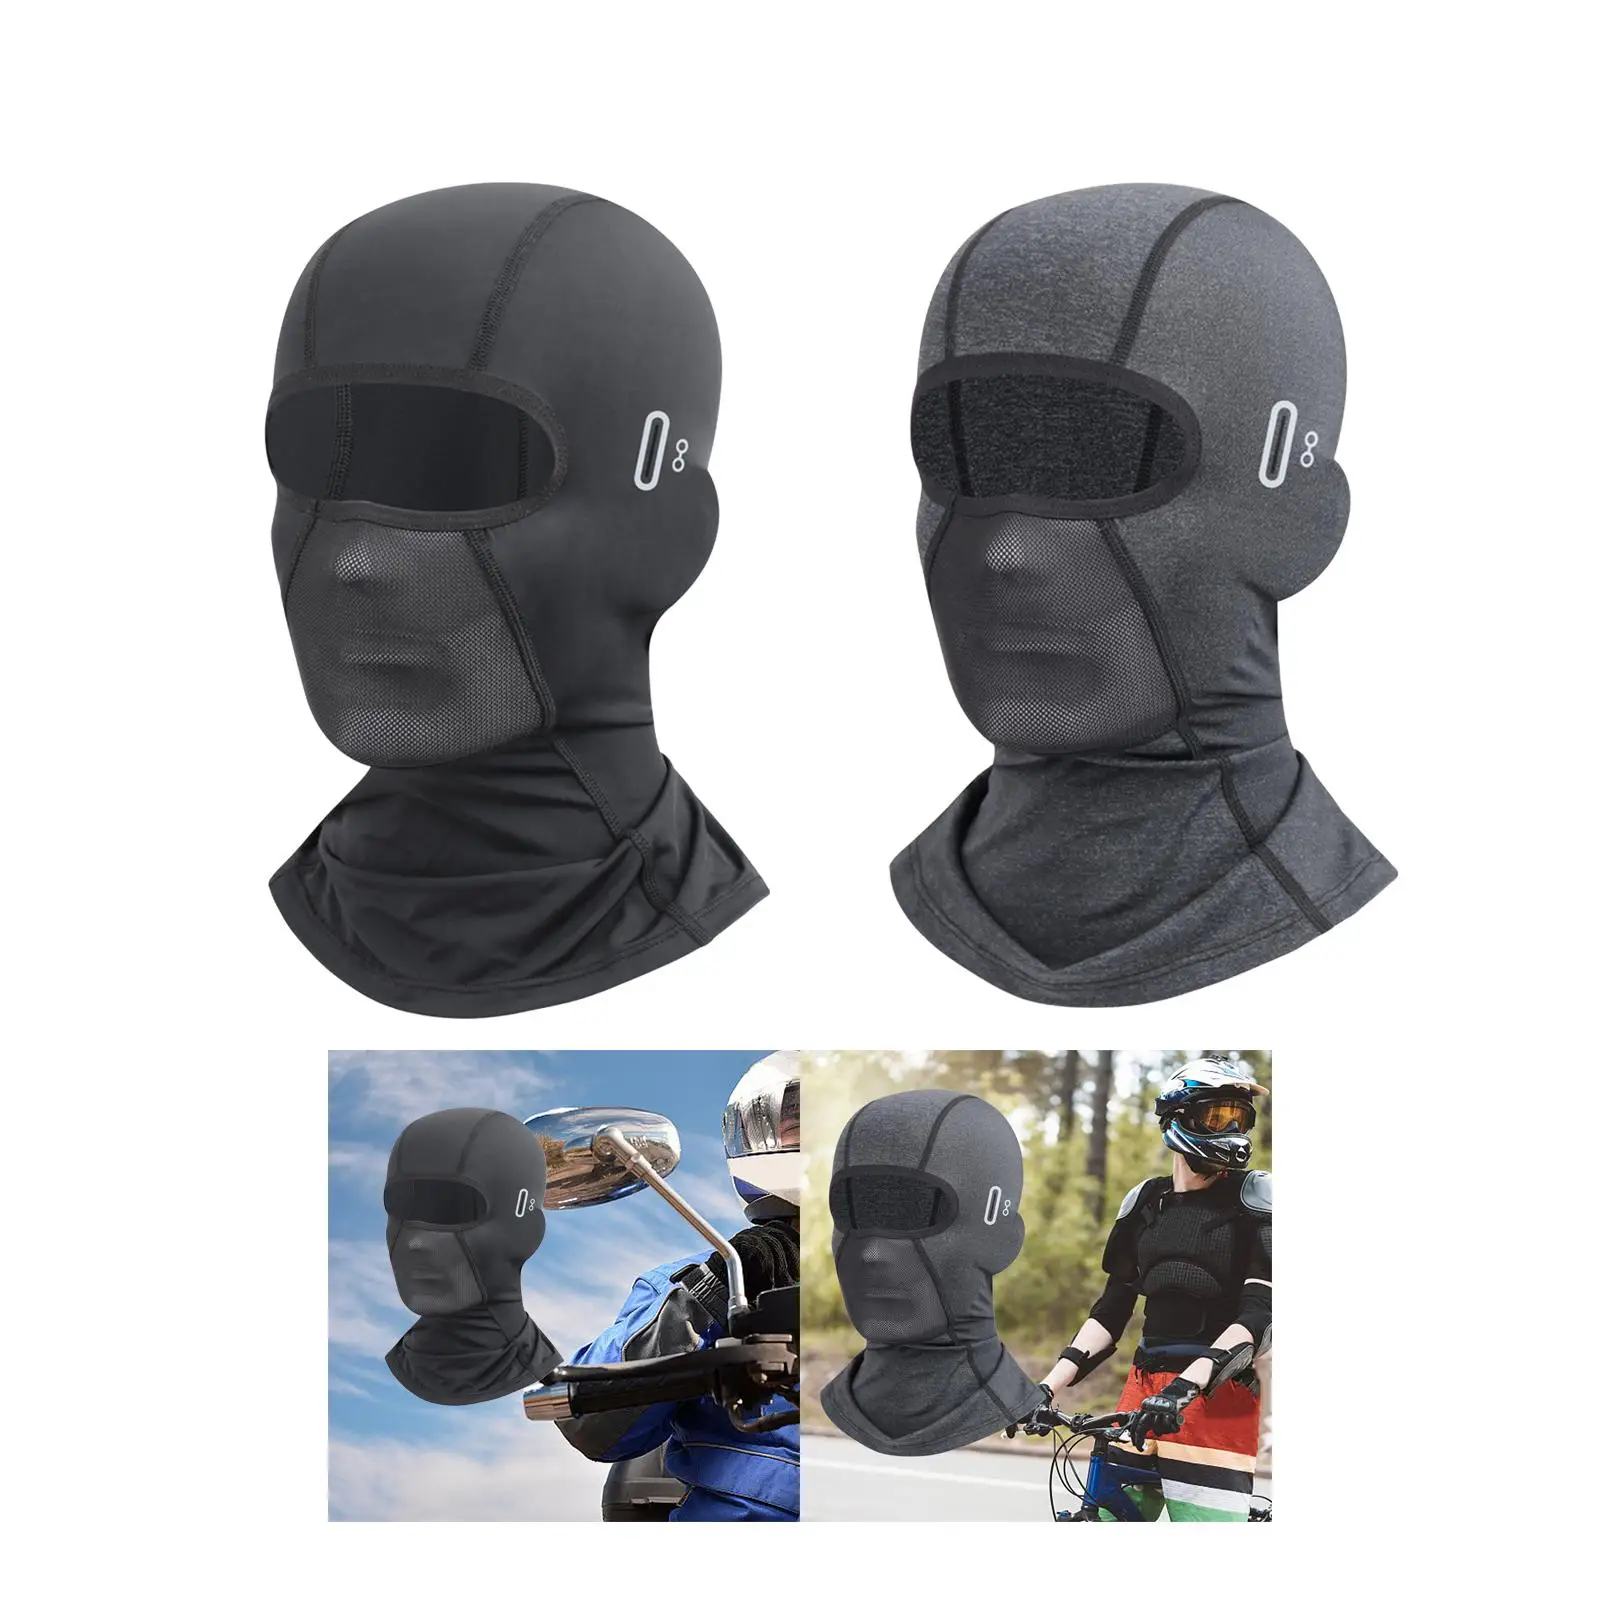 Balaclava Summer Cooling Motorcycle Scarf Ski Neck Warmer for Outdoor Riding Ski Snowboarding Motorcycle Cycling